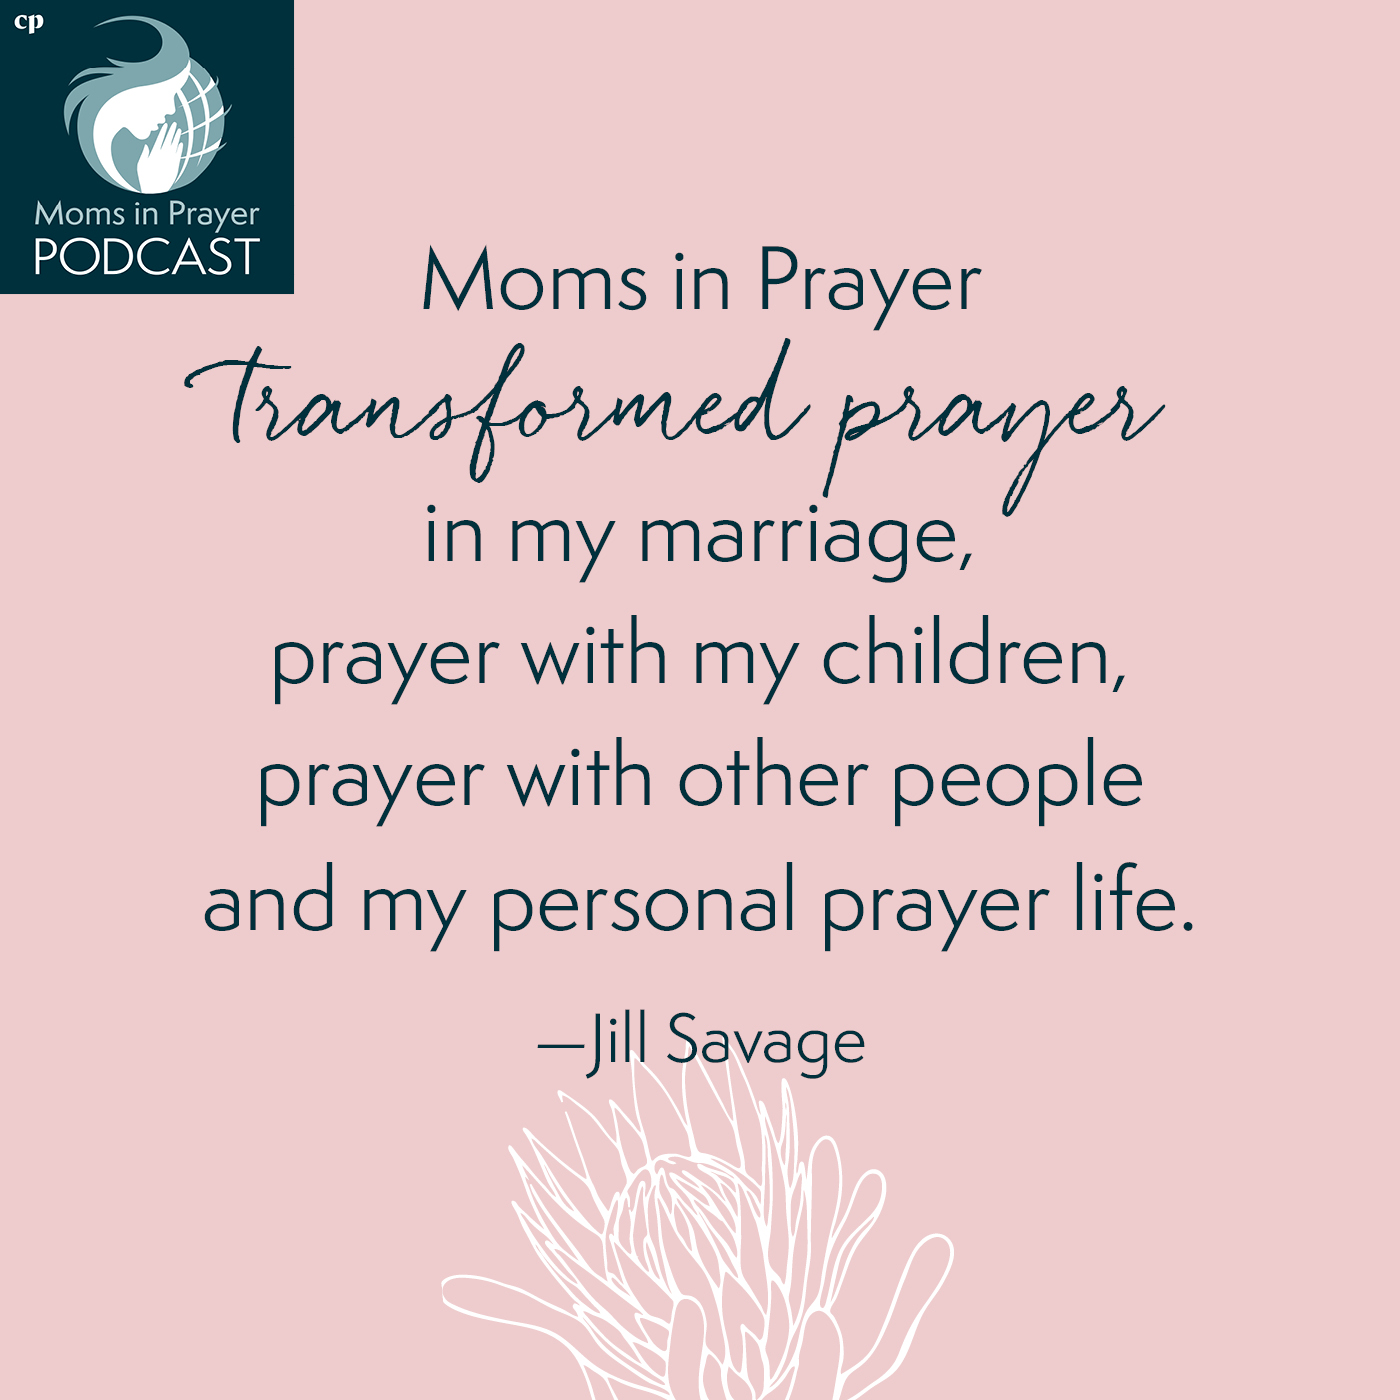 transformed prayer life for my kids, marriage, personal through Moms in Prayer